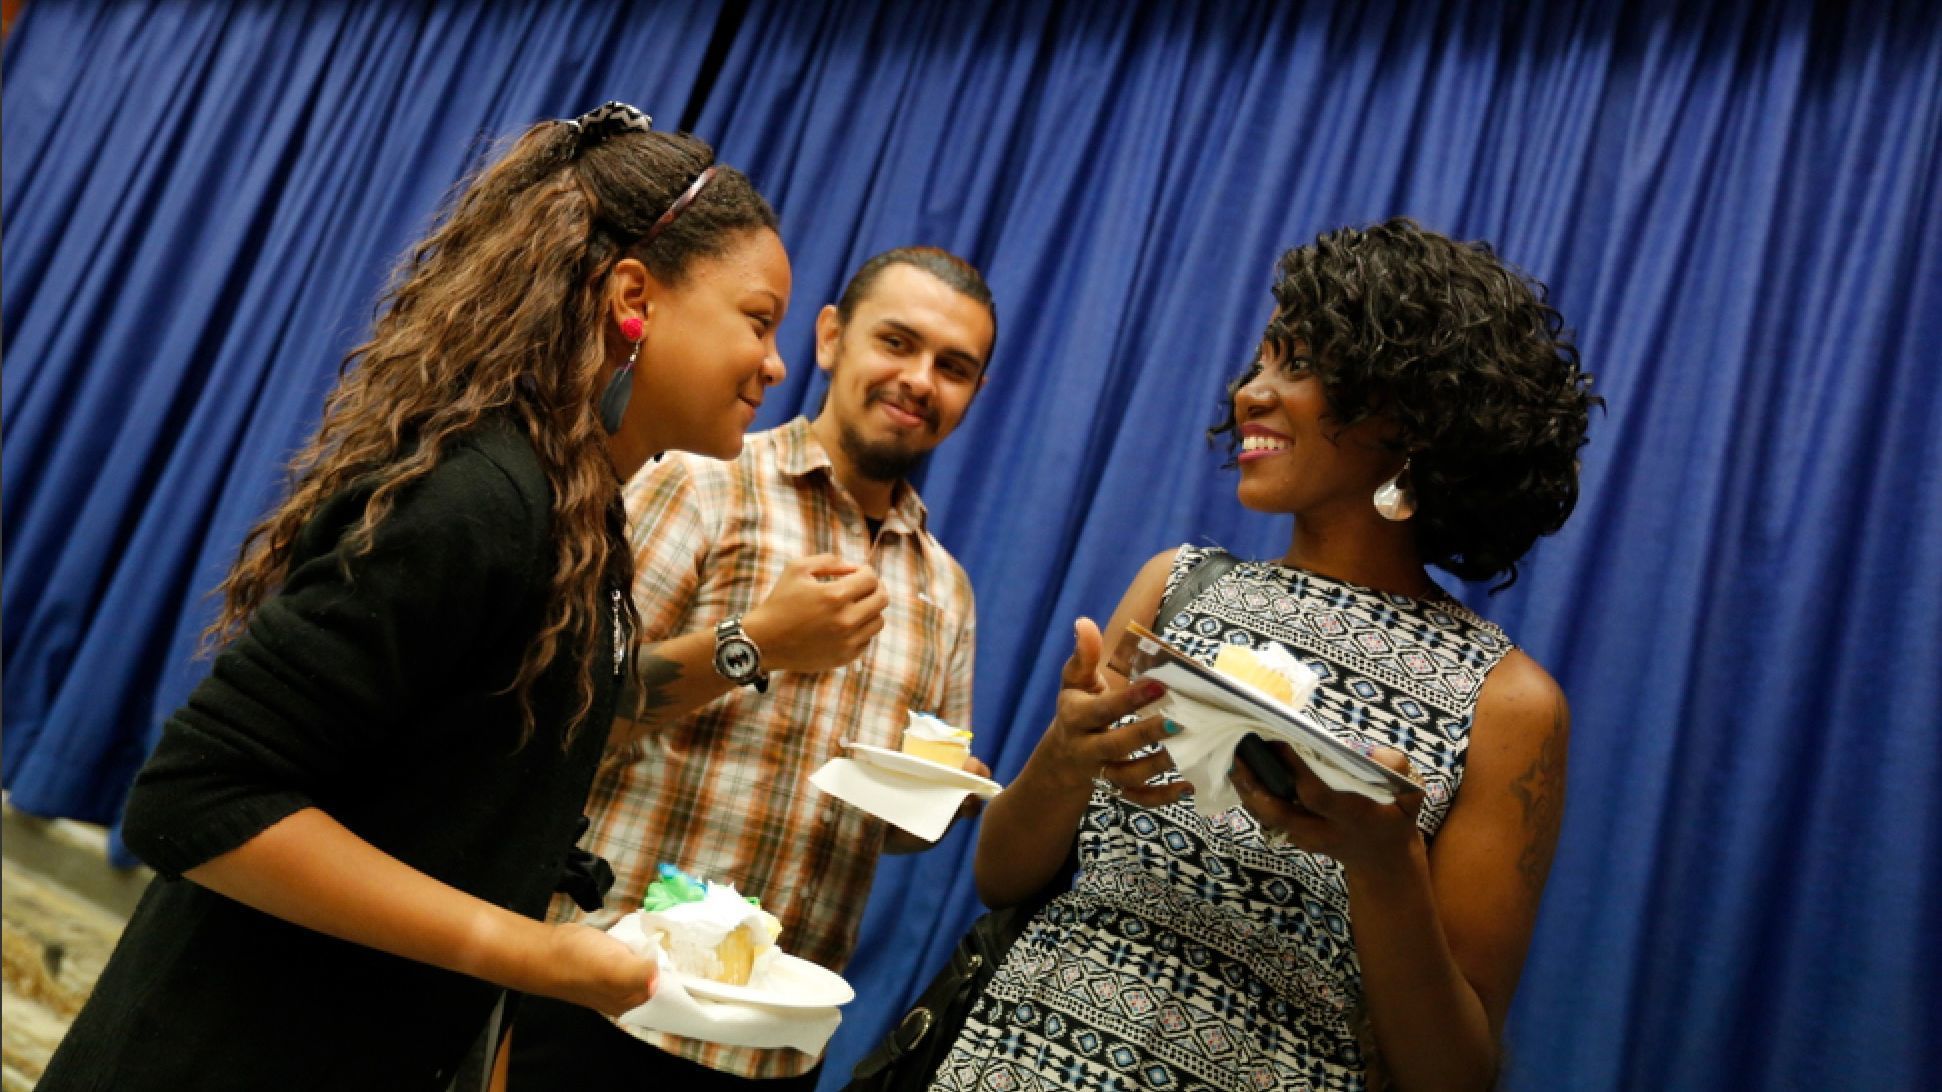 Angelica, Sanchez and Baker enjoyed cake after a reception following Angelica's sixth grade graduation.